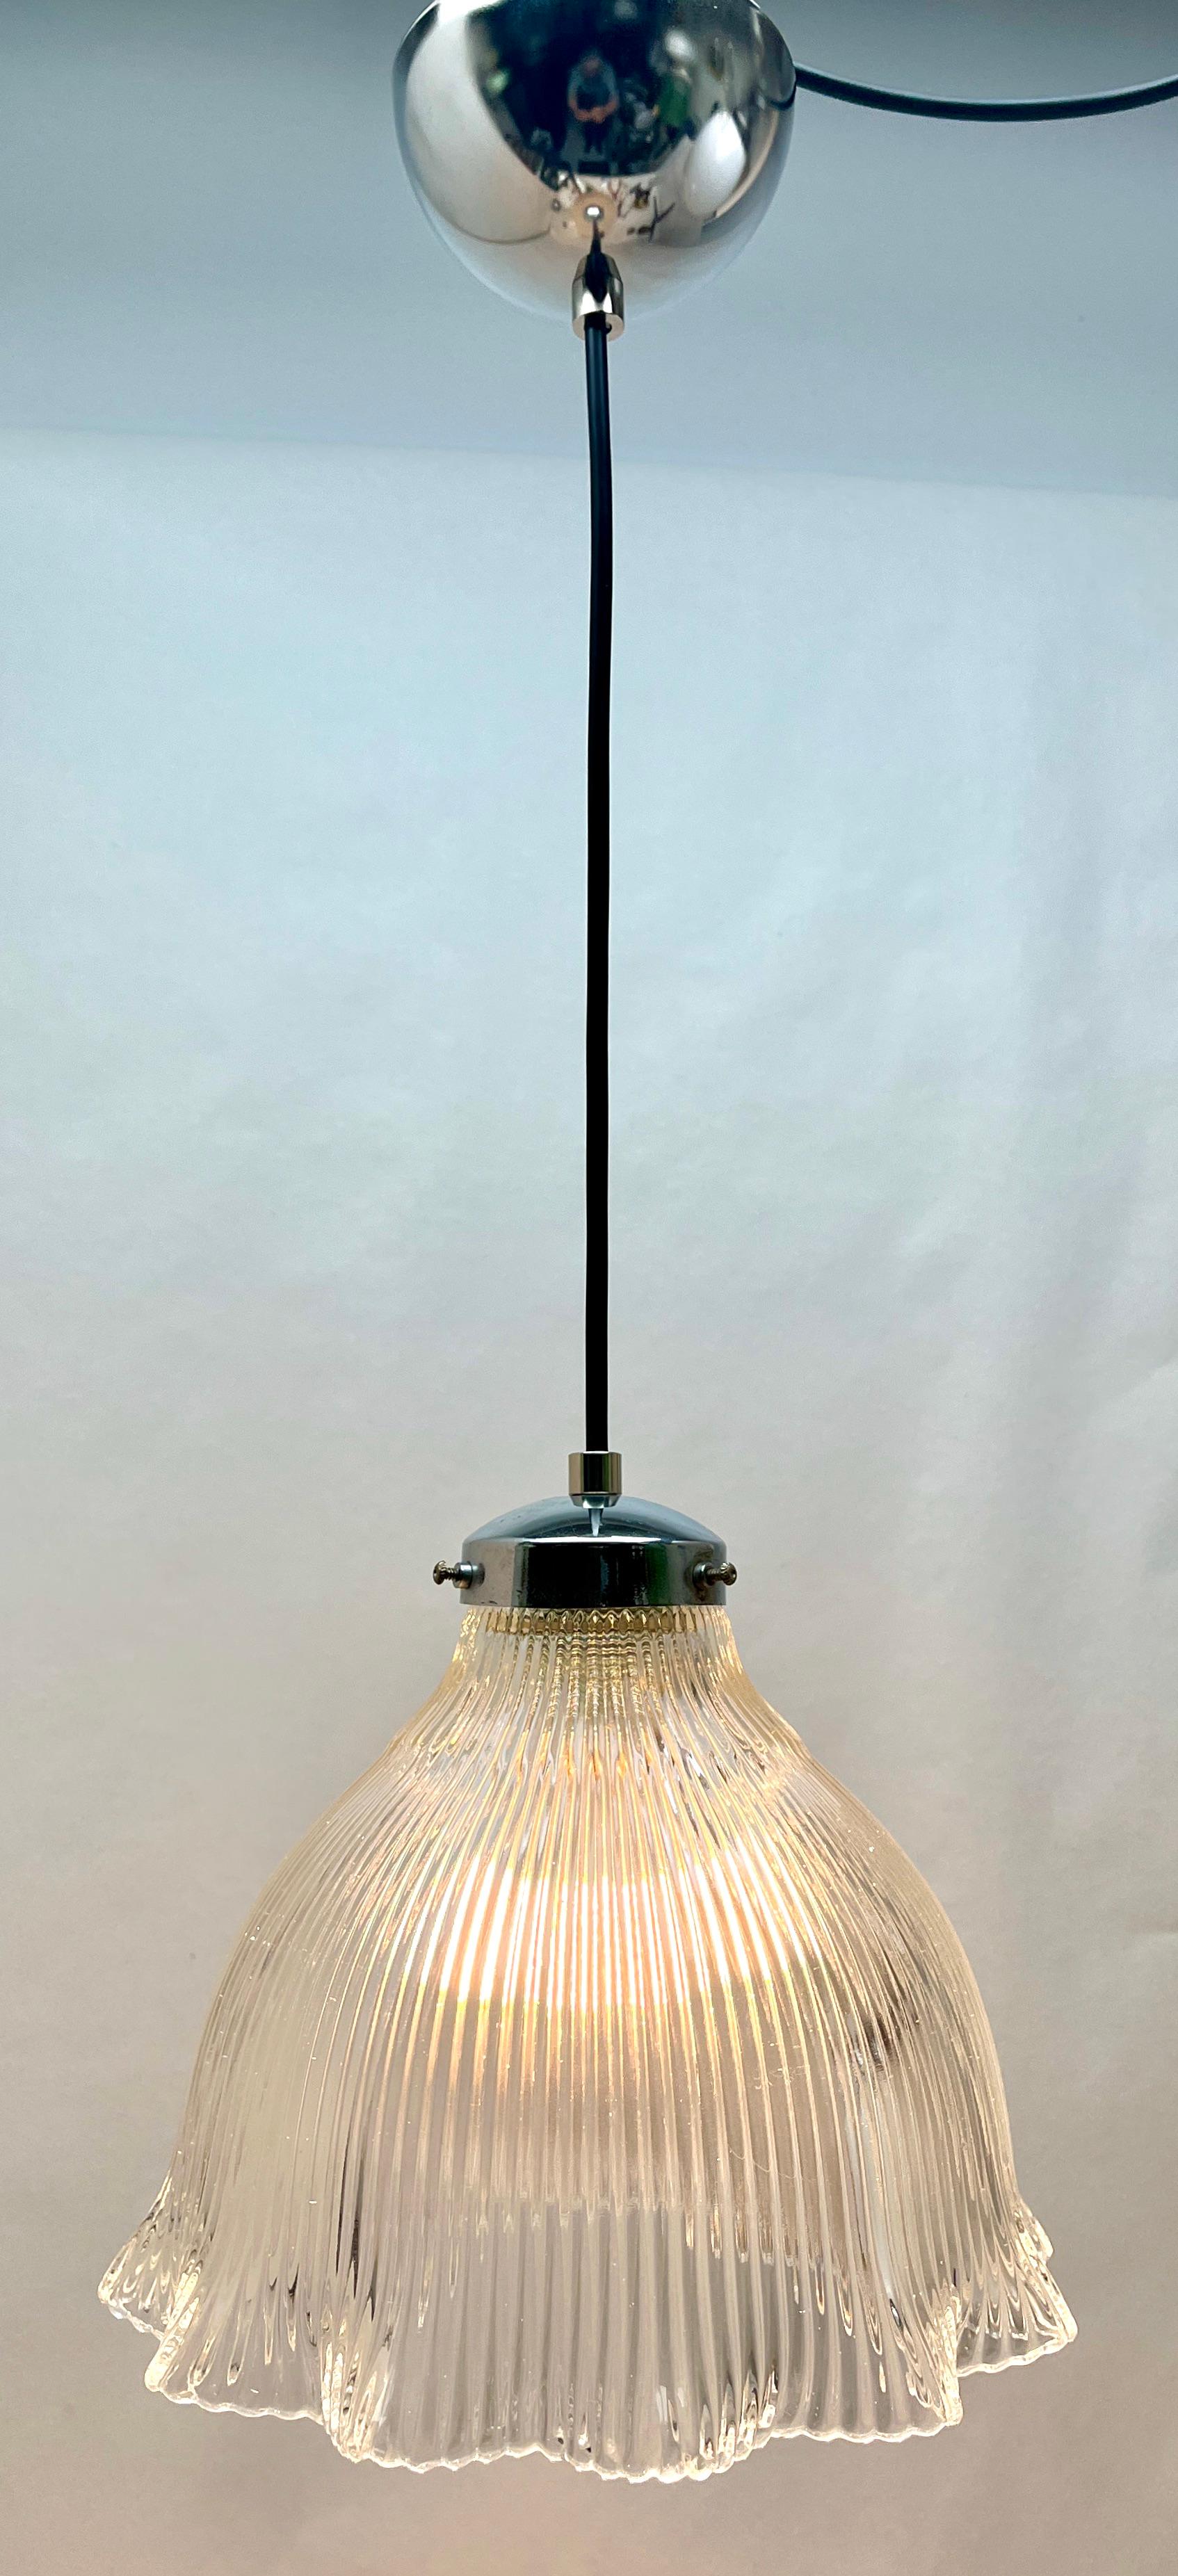 Mid-Century Modern Pendant Lamp with a Corrugated Glass Shade, 1950s, Netherlands For Sale